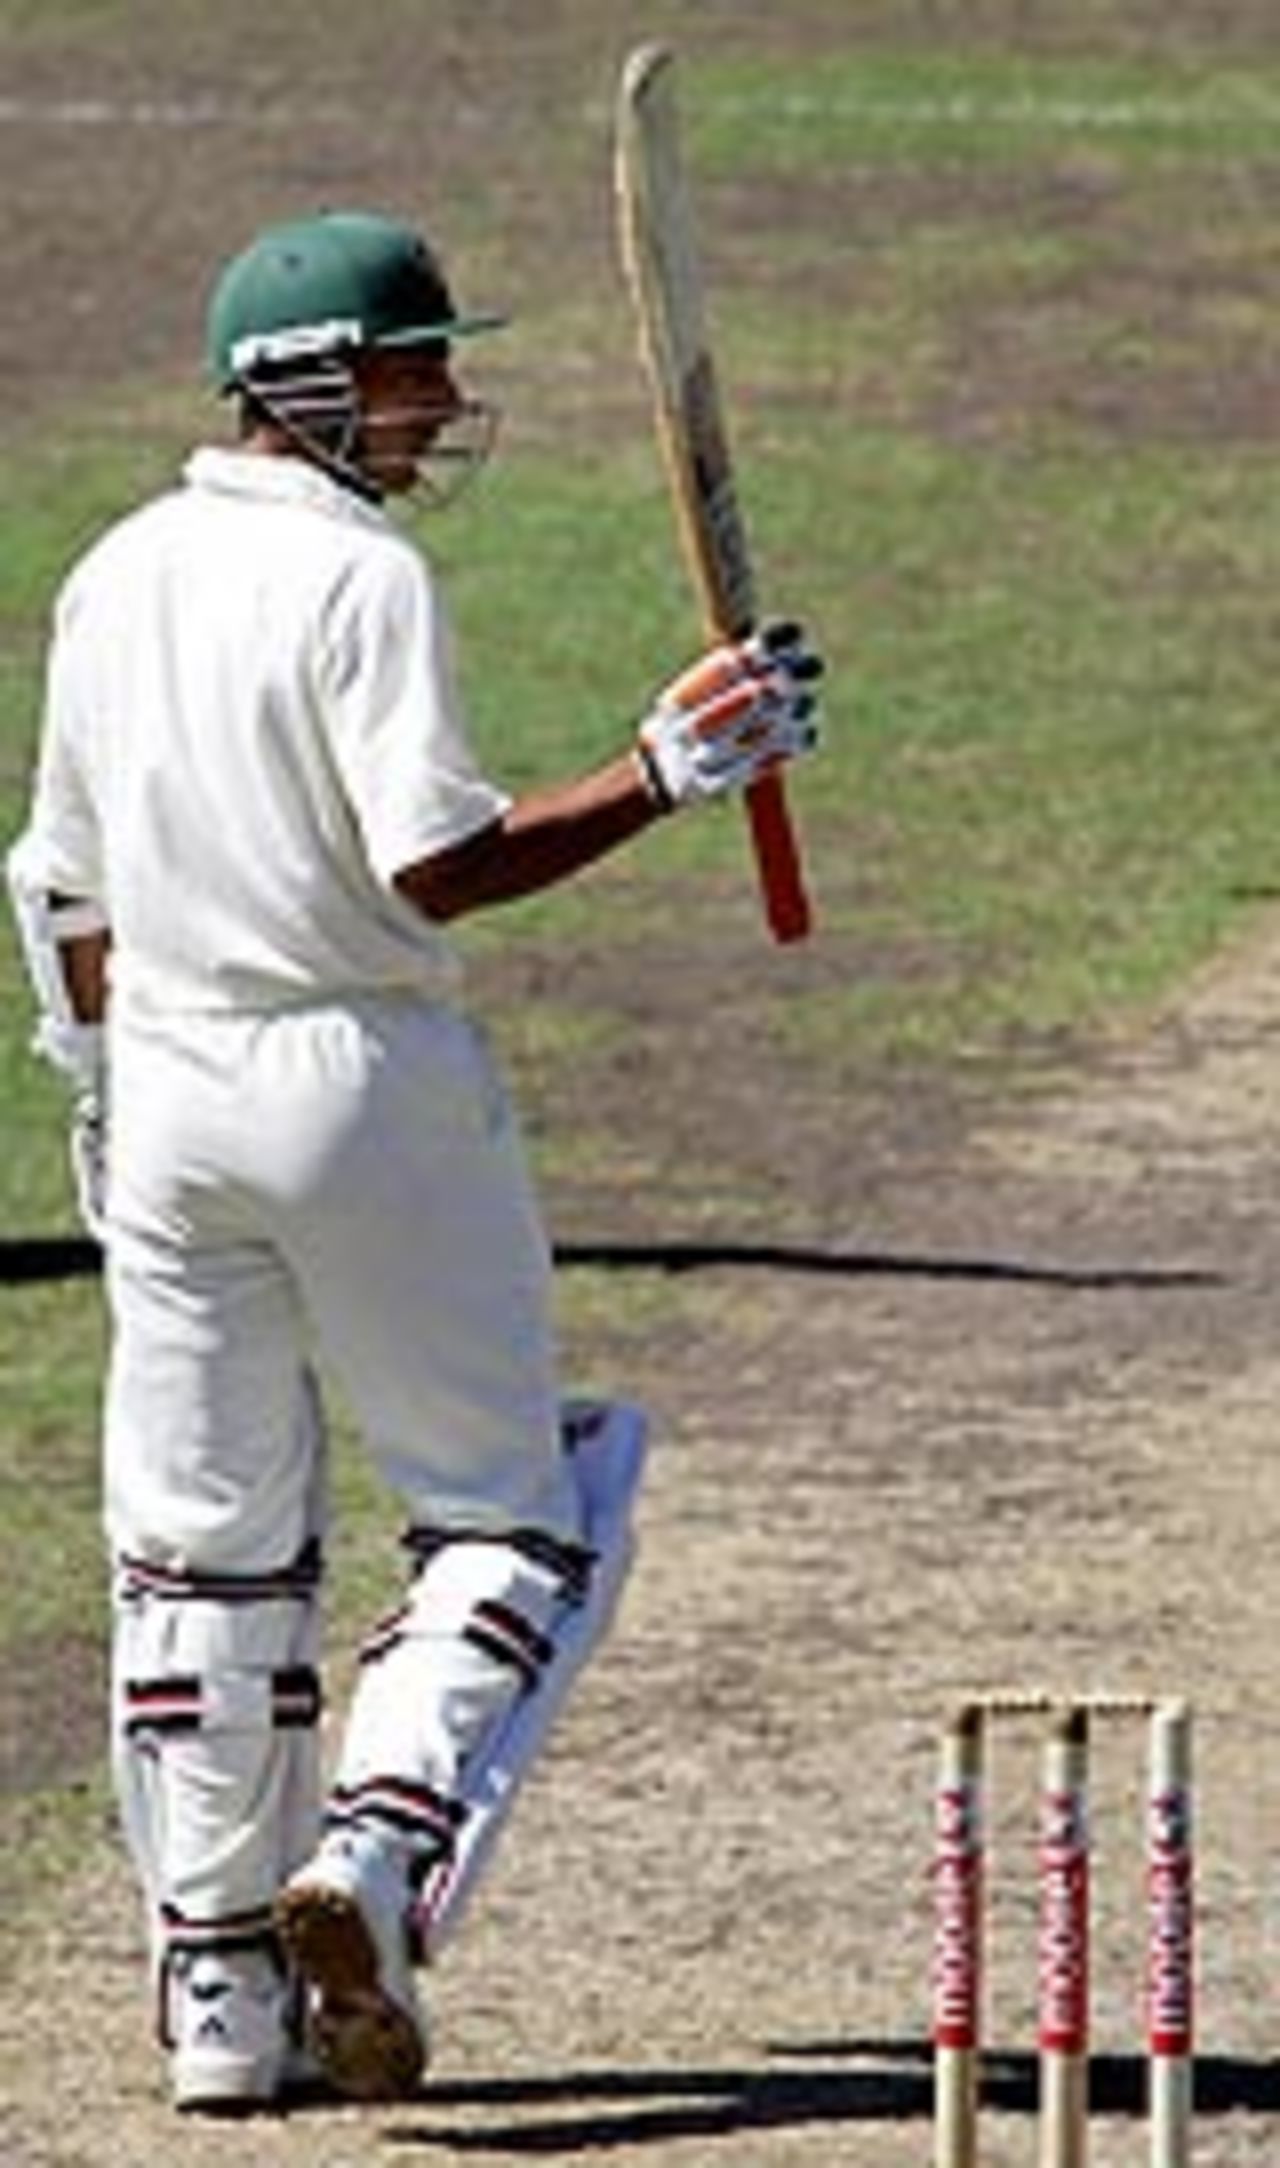 Yasir Hameed acknowledges applause for his fifty, Australia v Pakistan, 3rd Test, Sydney, January 5, 2005